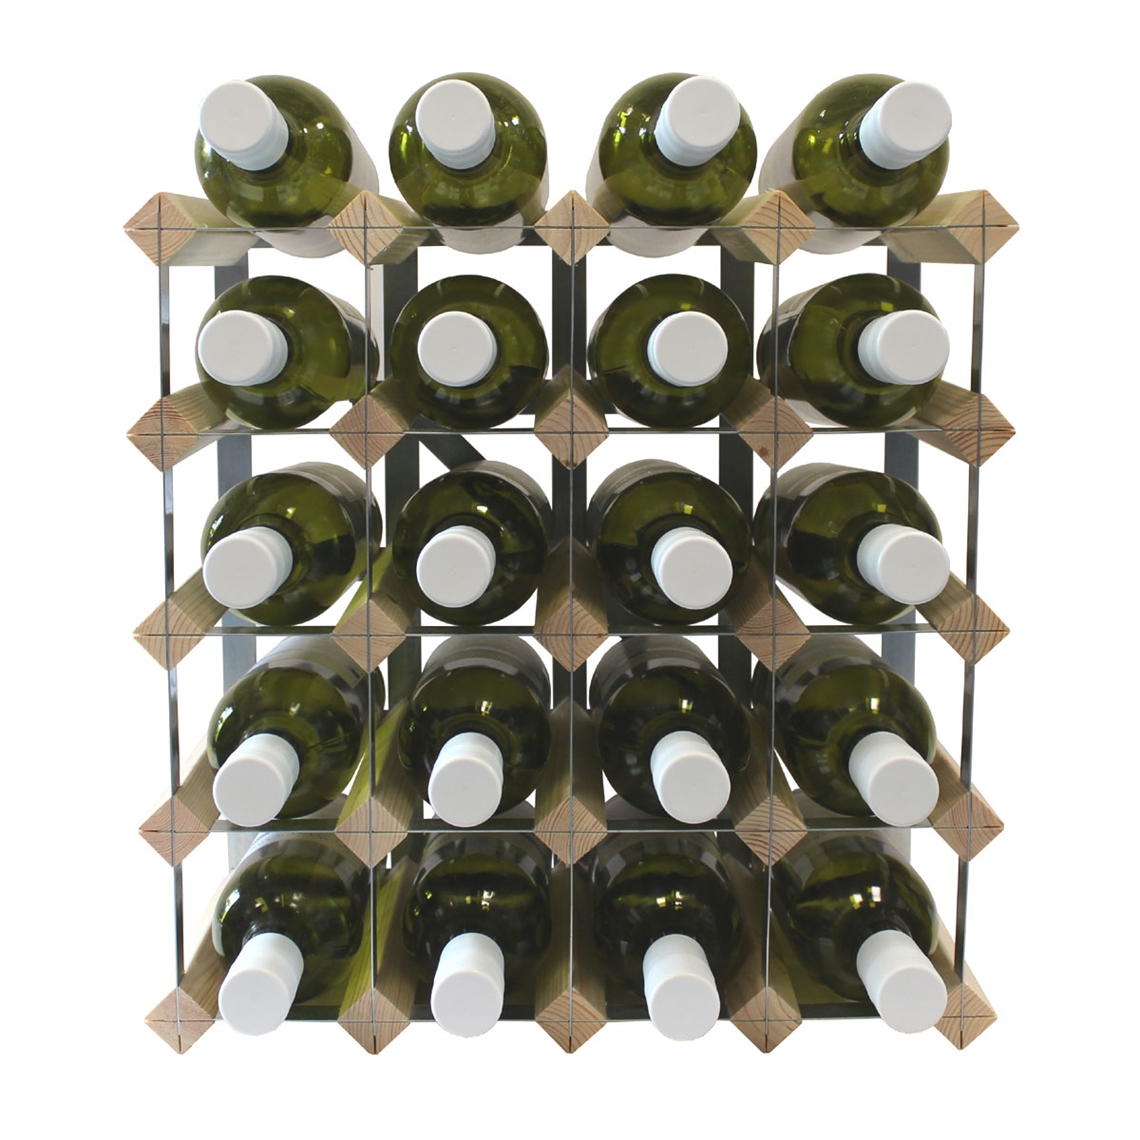 View more wall mounted w series from our Assembled Wine Racks range